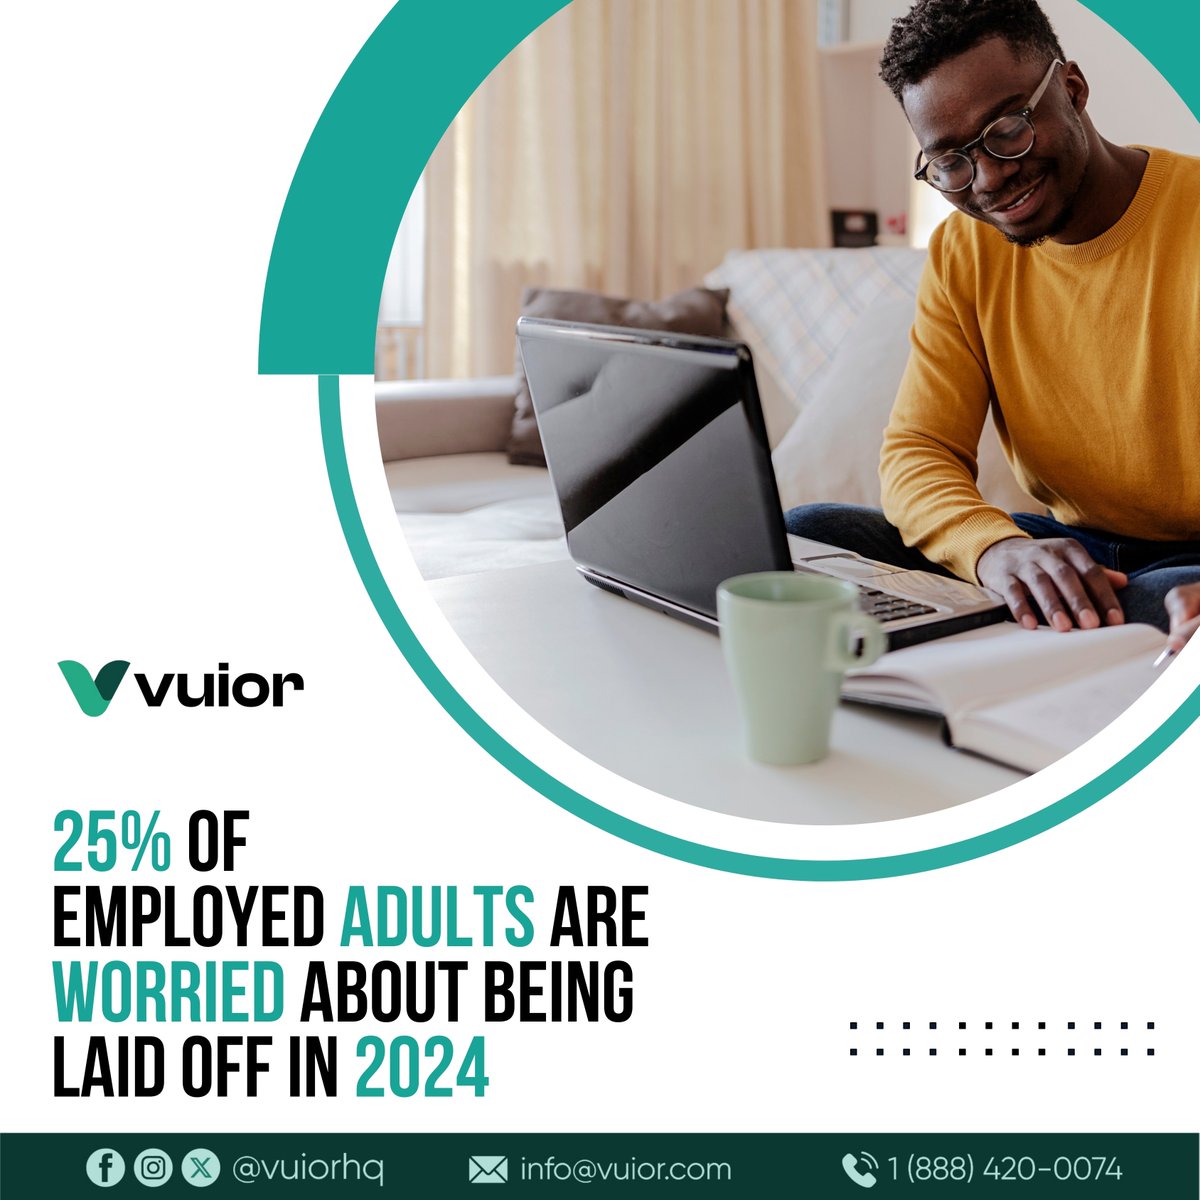 In a climate where job security concerns are growing, as evidenced by a quarter of employed adults fearing layoffs in 2024, managing financial stability becomes crucial.

#jobsecurity #financialstability #layoffconcerns #vuiorsolutions #householdbills #financialmanagement